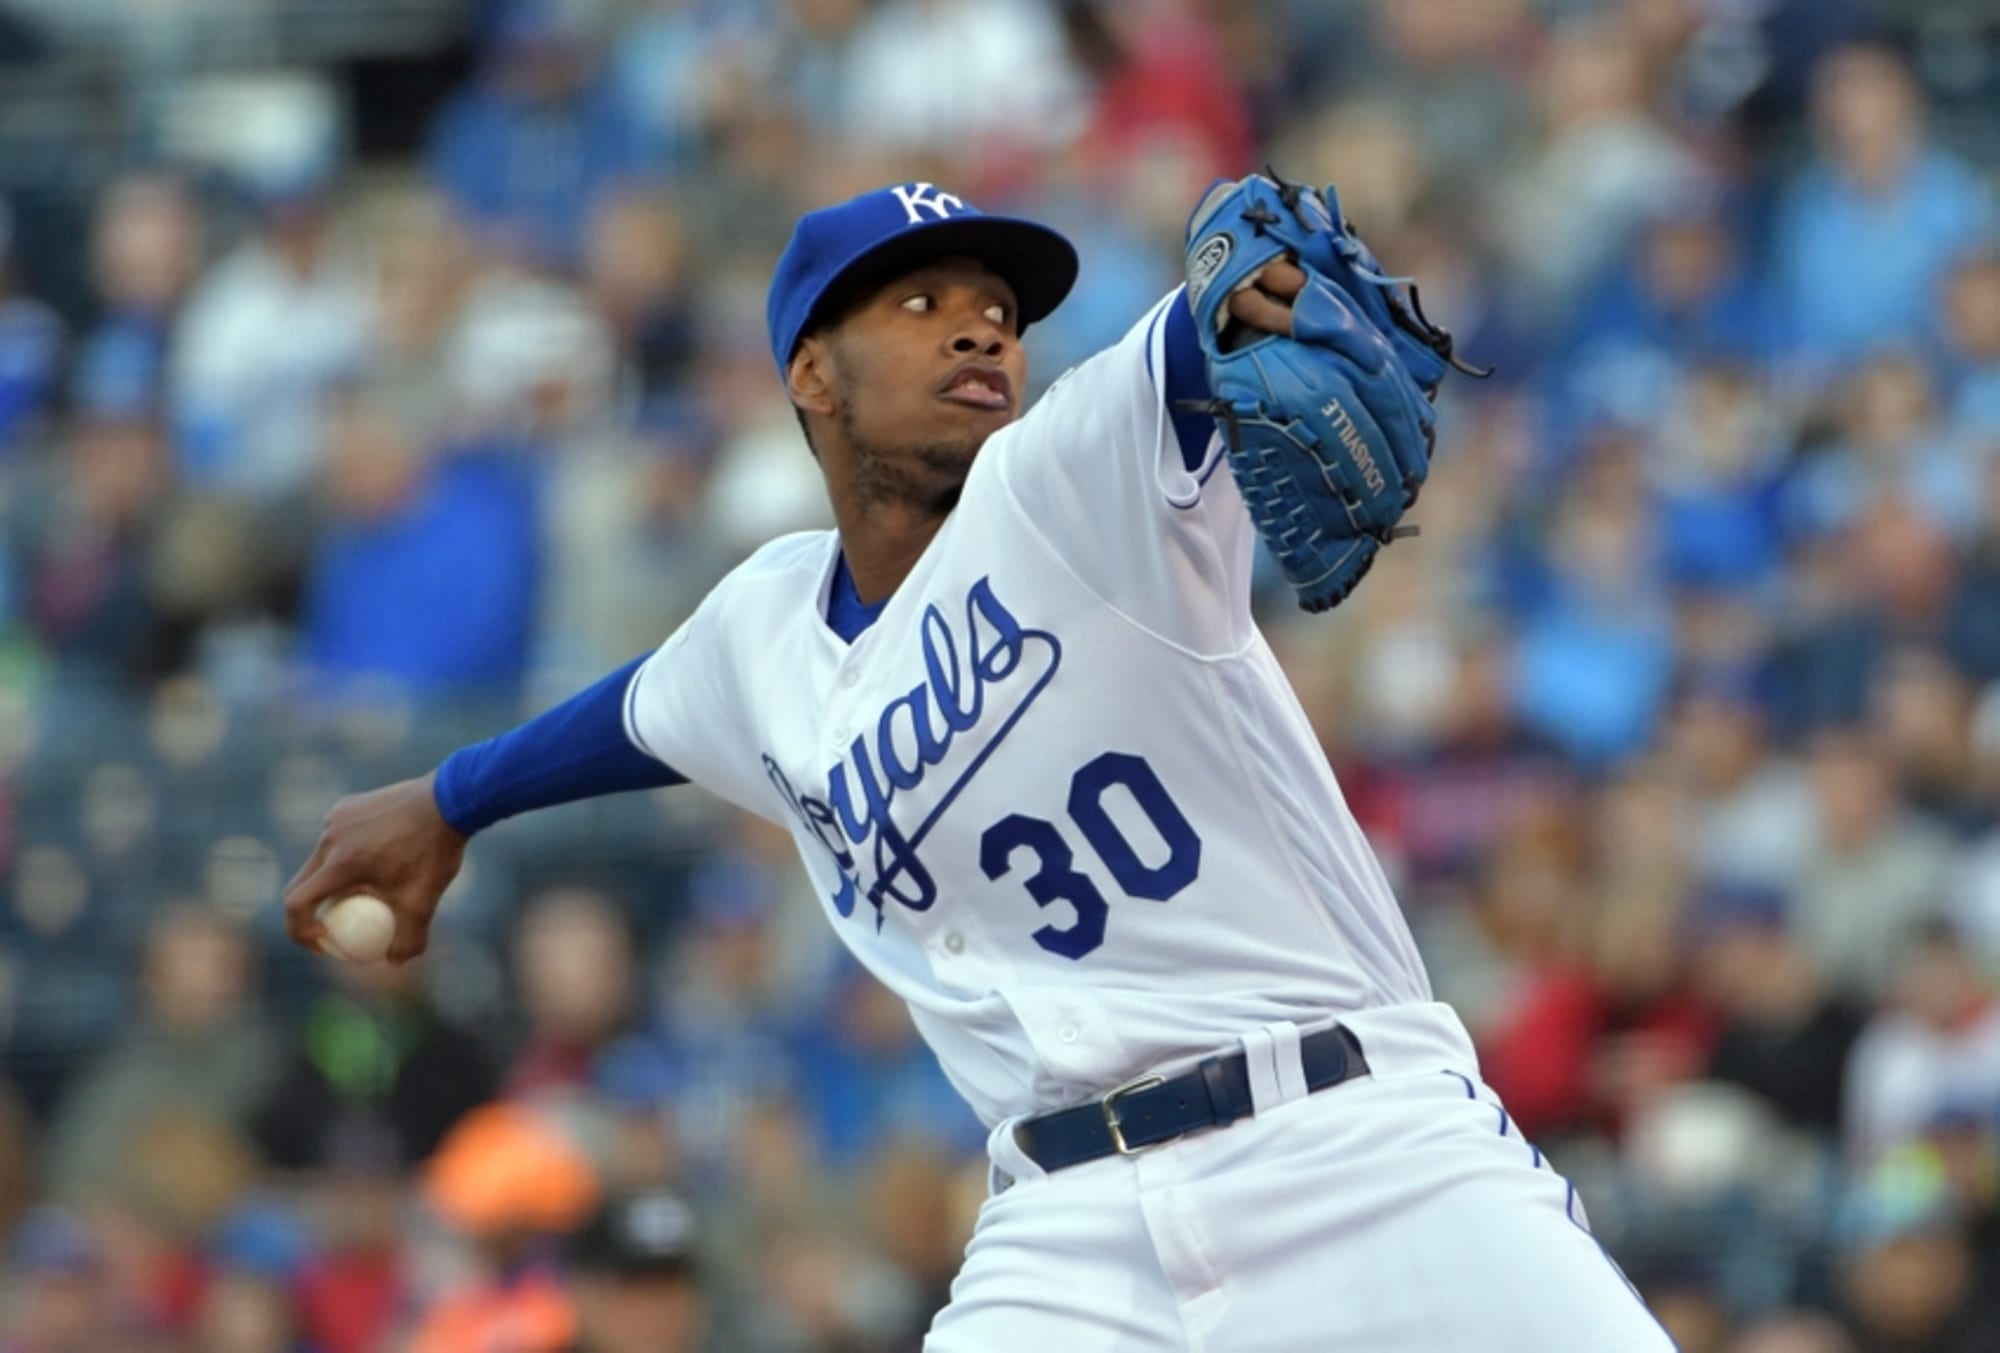 Yordano Ventura: Remembering the young Royals pitcher - Sports